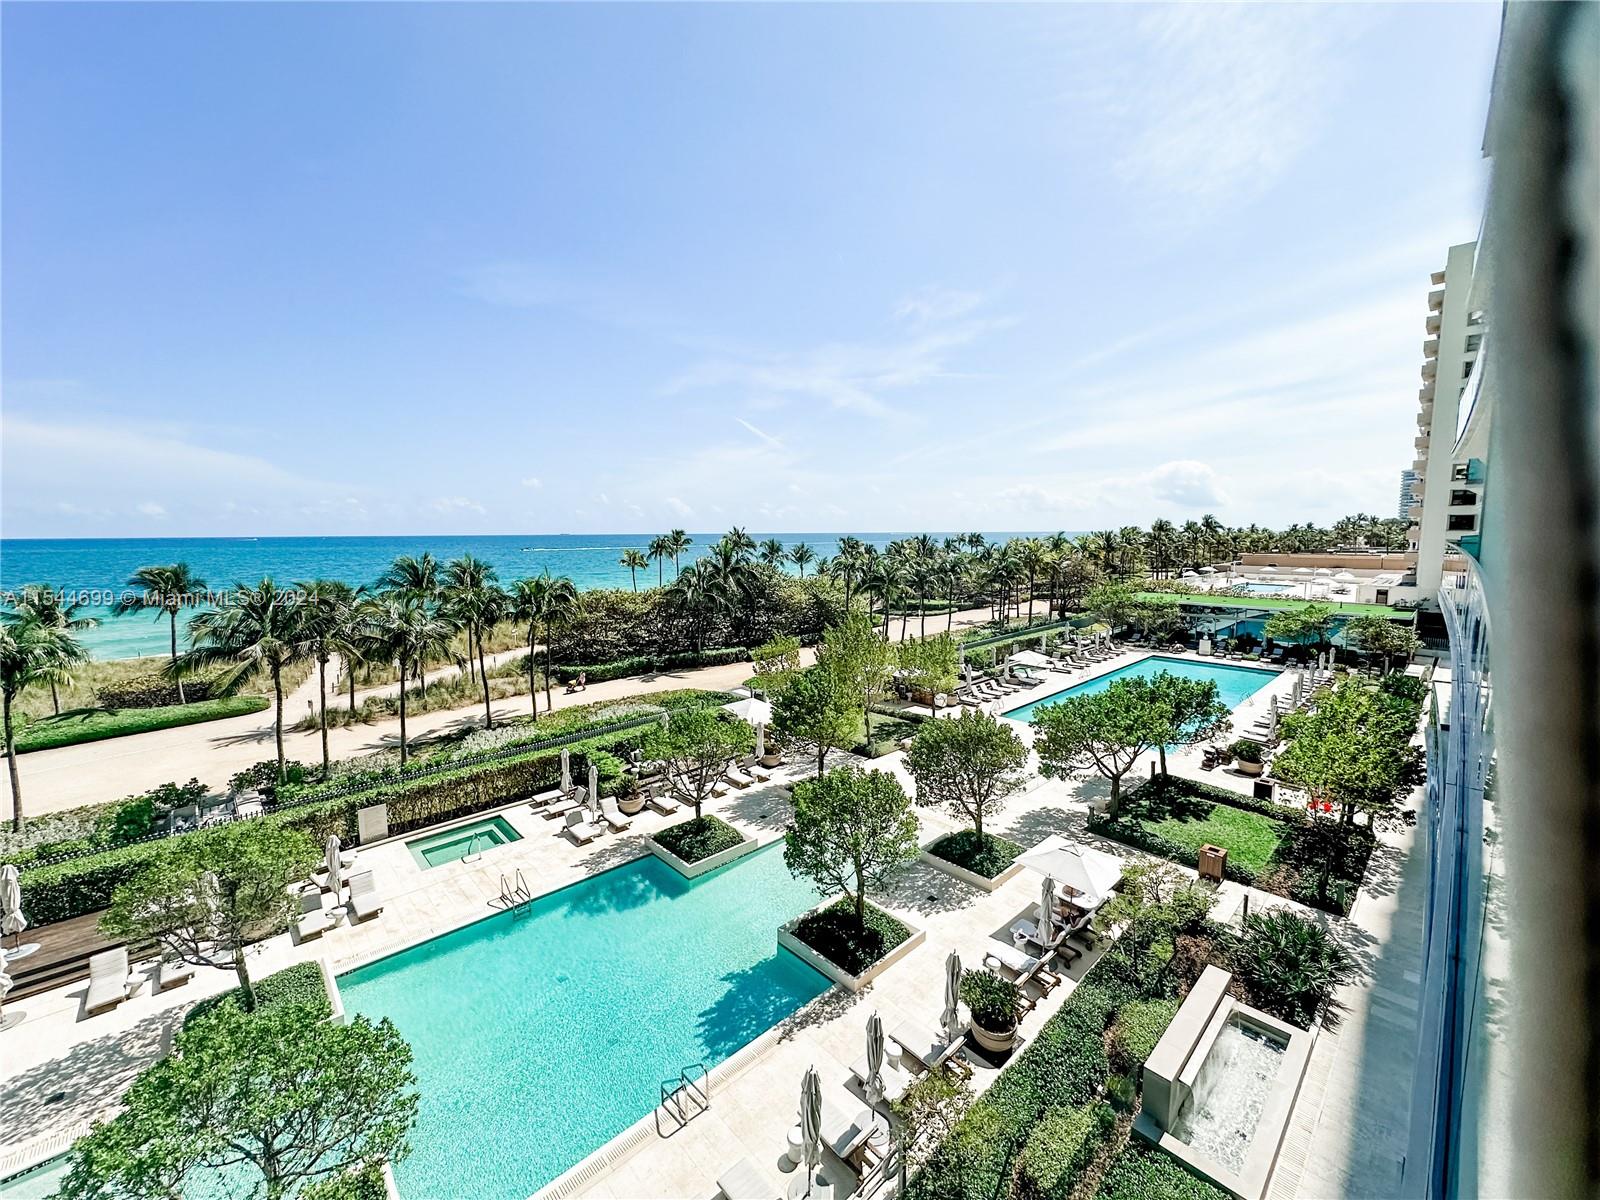 Espectacular 2 Bedroom + Den unit in Oceana Bal Harbour. Den has a full bathroom next to it and can be used as a third bedroom. Breathtaking direct ocean views. Enjoy the living of Bal Harbour in this resort-style condo , 5 stars amenities.